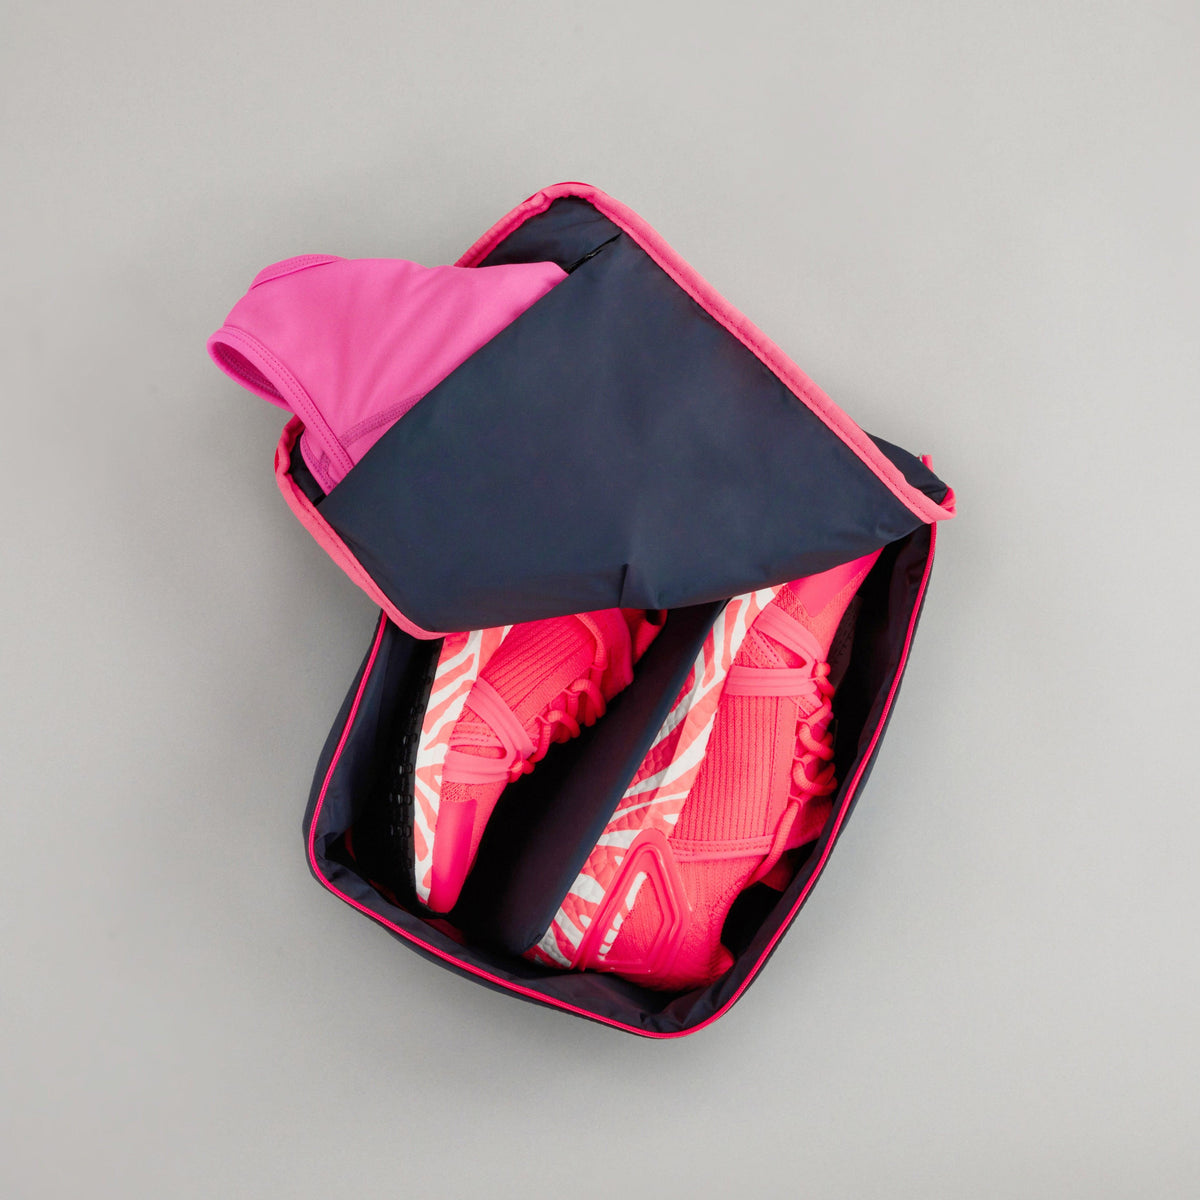 Small Shoe carry in Midnight Neon Pink colourway unzipped showing shoes inside and socks in the inner pocket 